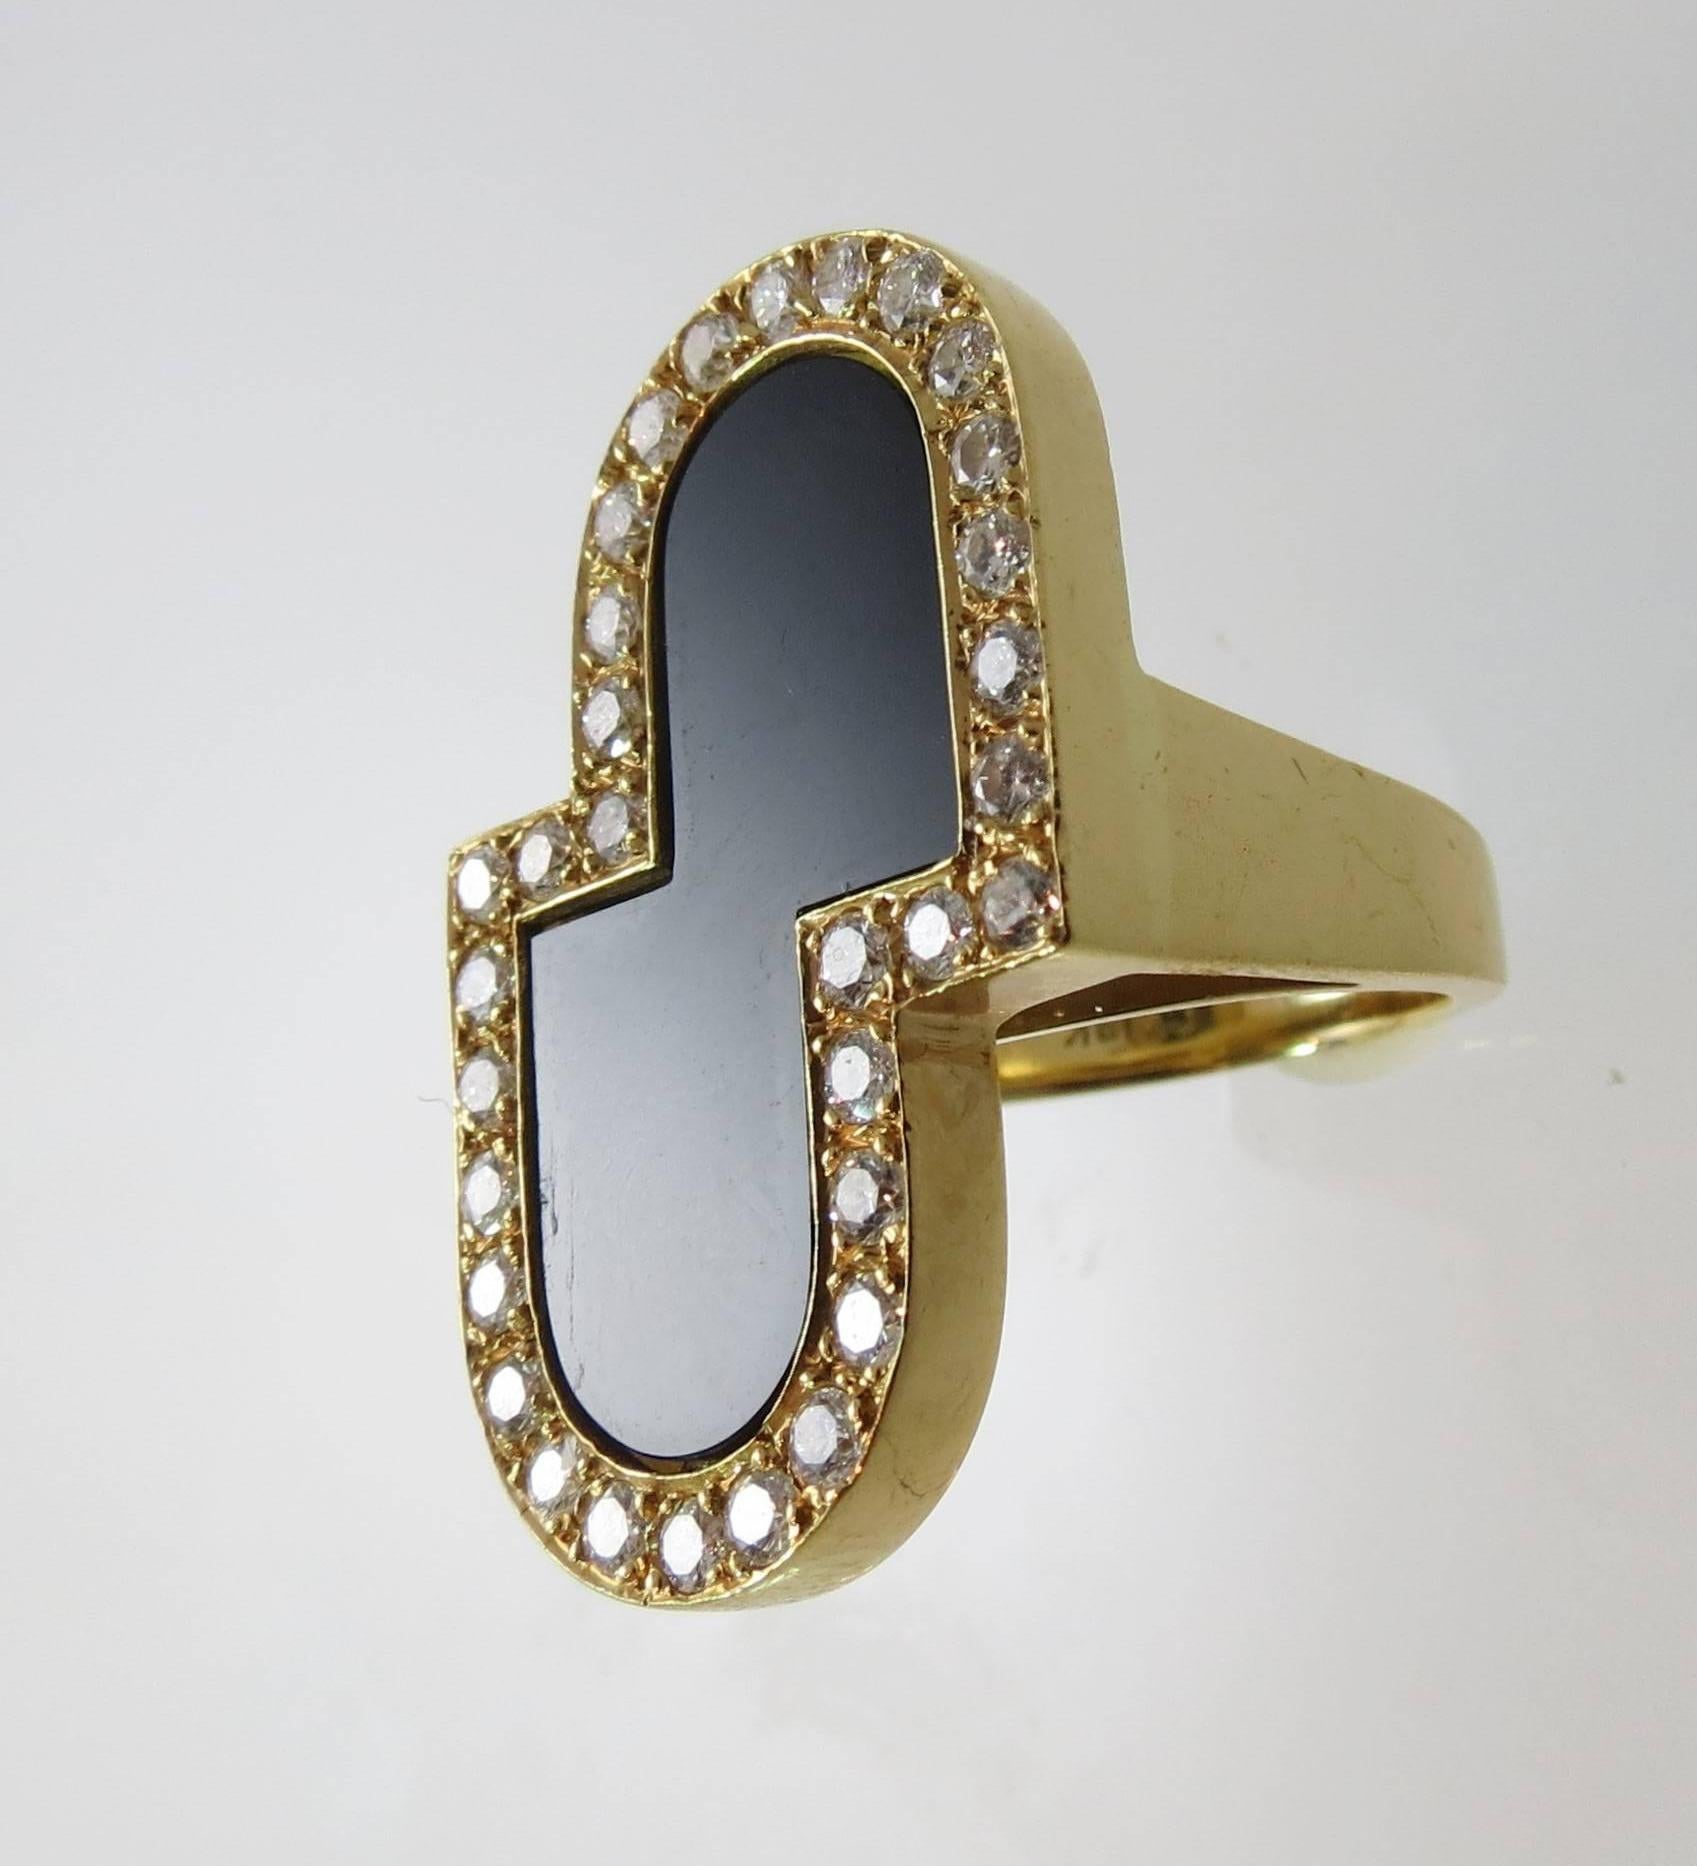 14K yellow gold ring with black onyx, surrounded by 32 round diamonds weighing approximately 1.12ct, G color, VS clarity
Size 5.5, may be sized 